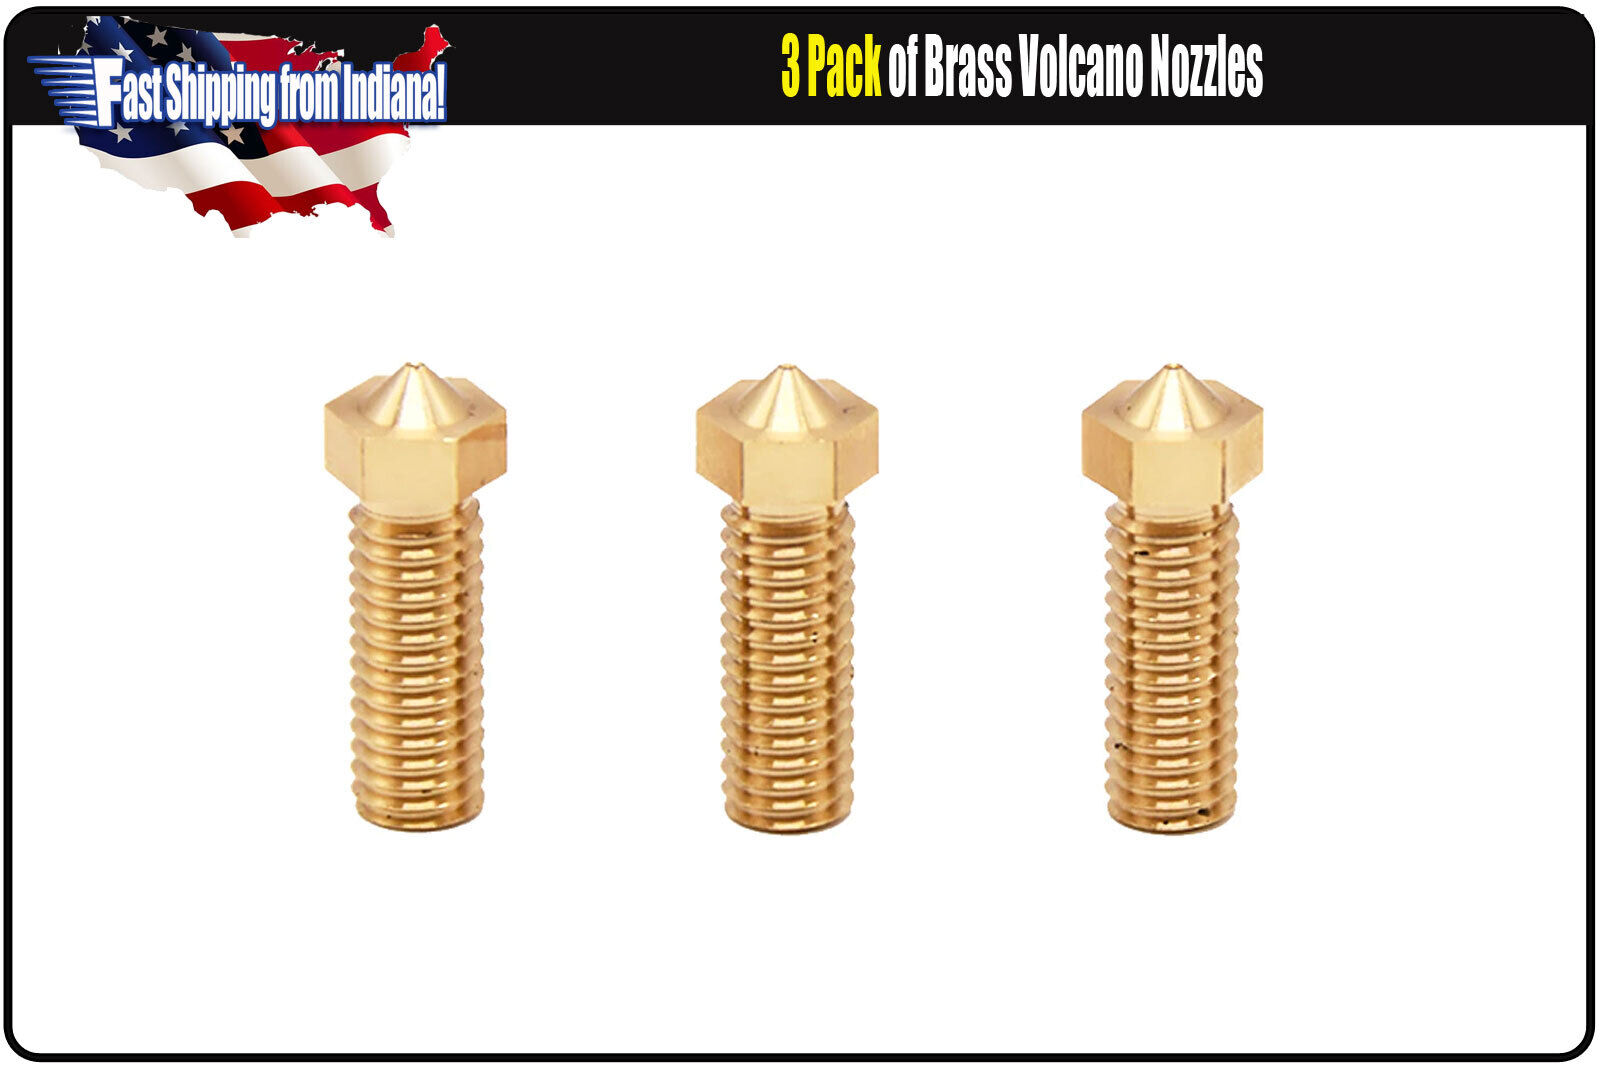 V6 Volcano Nozzle, M6 Thread, 1.75 filament, Stainless Steel or Brass